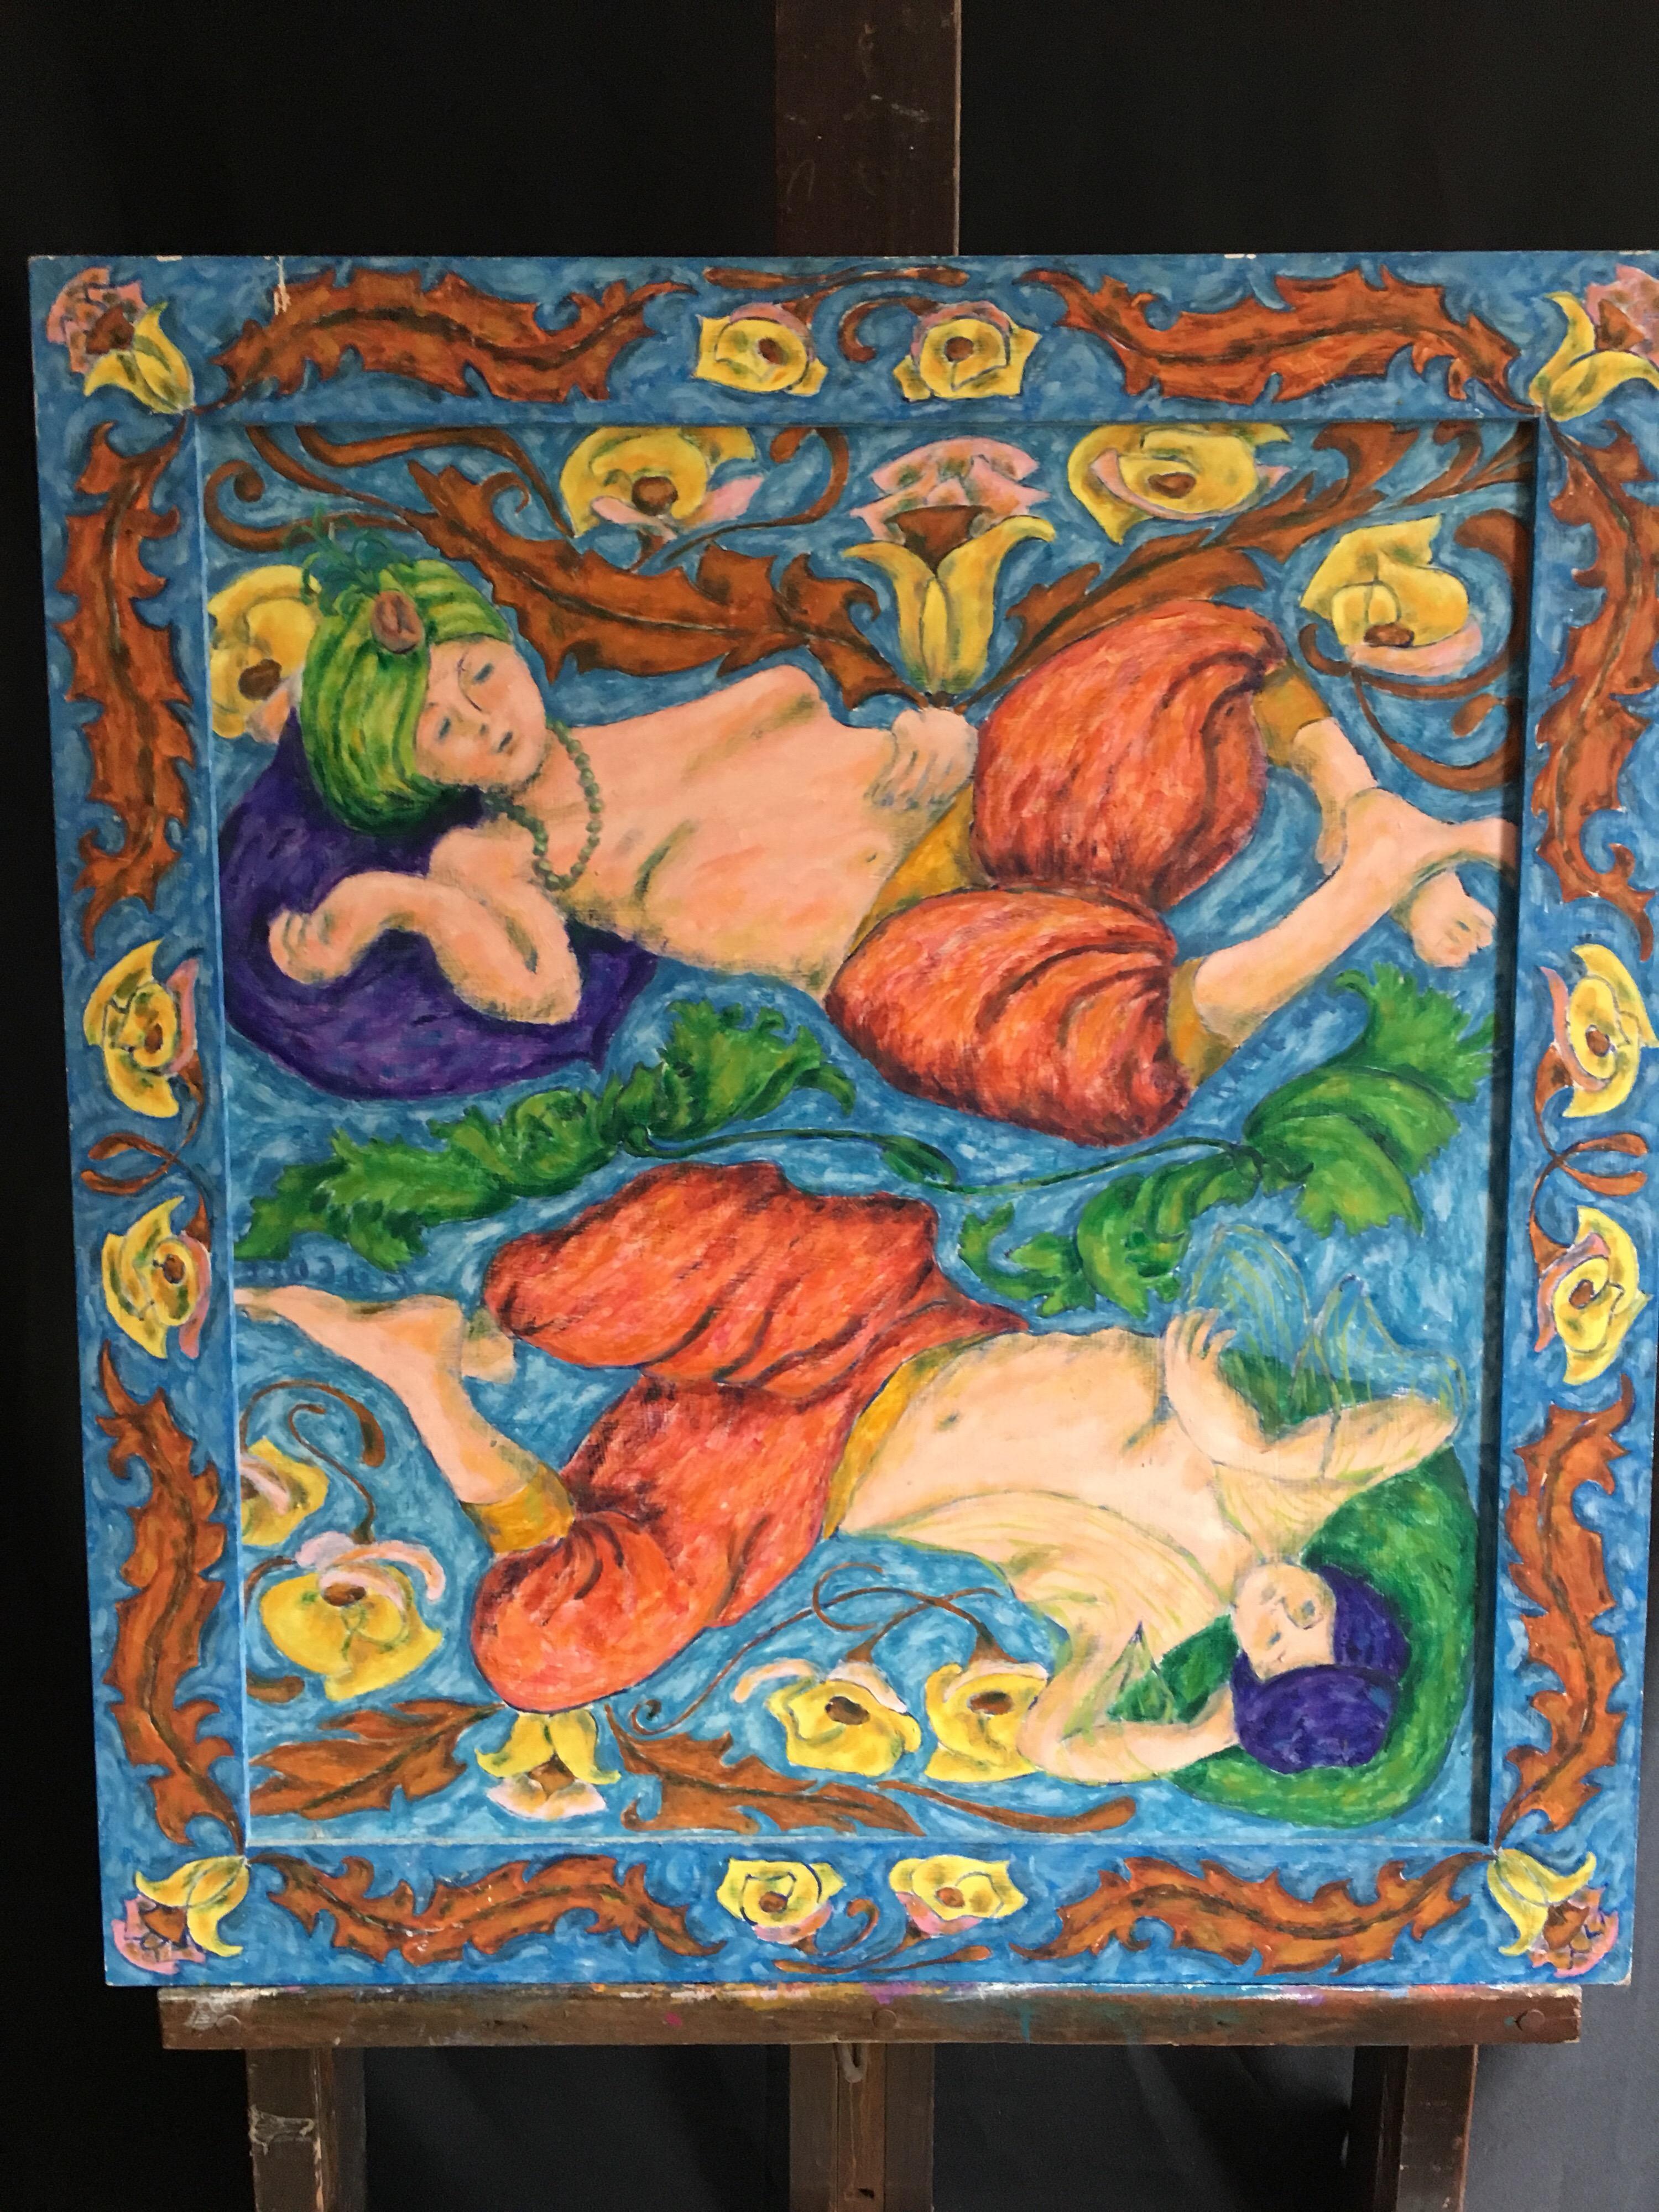 The Genie, Bright Colours, Oil Painting, Signed
By British artist, Kate Orr, 20th Century
Signed by the artist verso
Oil painting on board, framed
Framed size: 28 x 26 inches

Wonderful oil painting of two genie type characters, floating in a